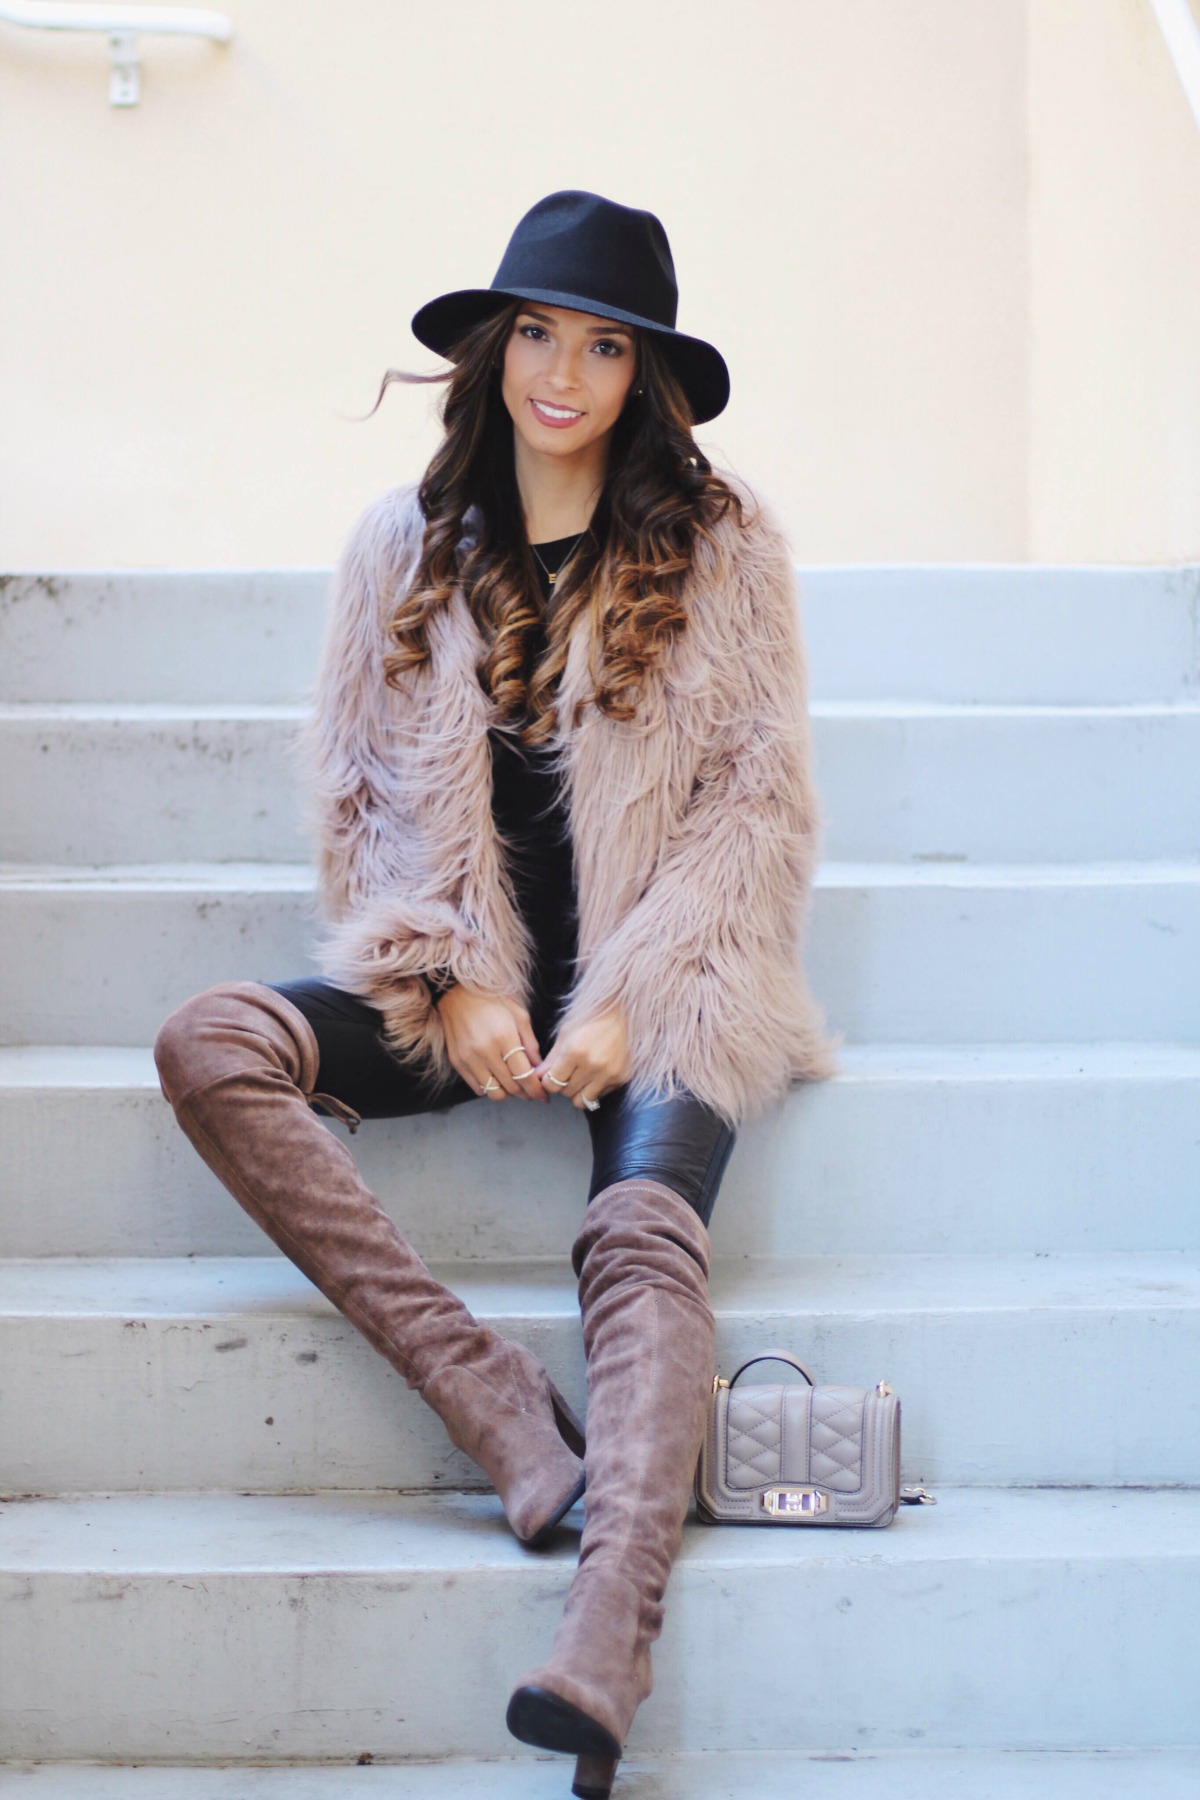 thigh high boots and fur coat